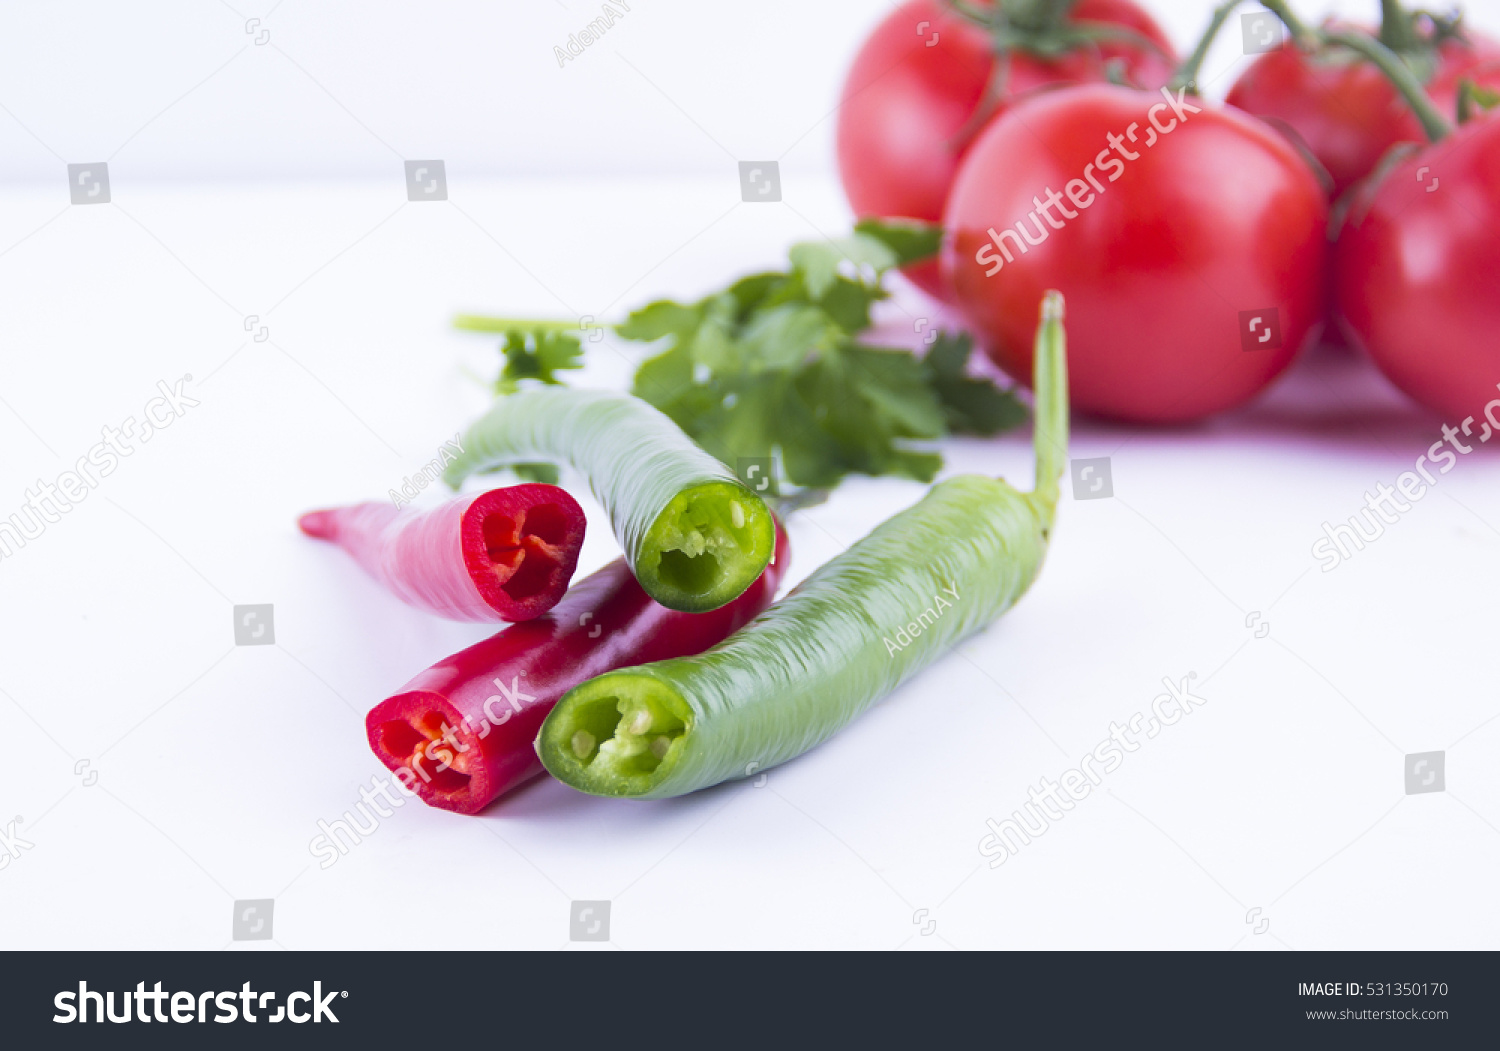 Fresh green and red chili pepper, tomato isolated on a white background
 #531350170